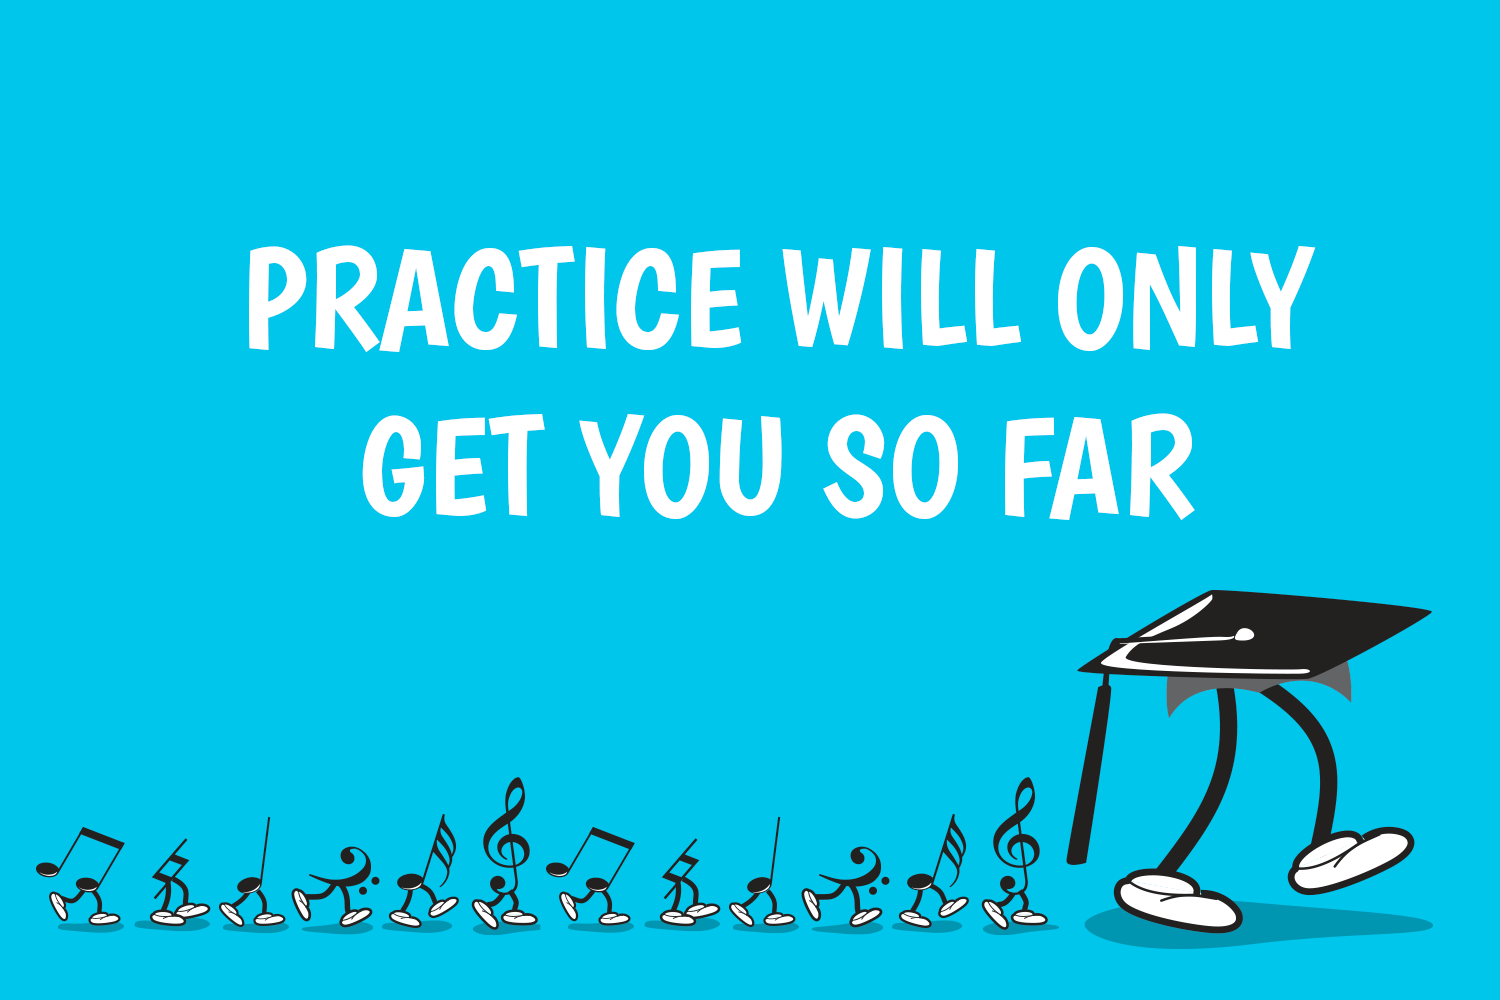 Practice will only get you so far